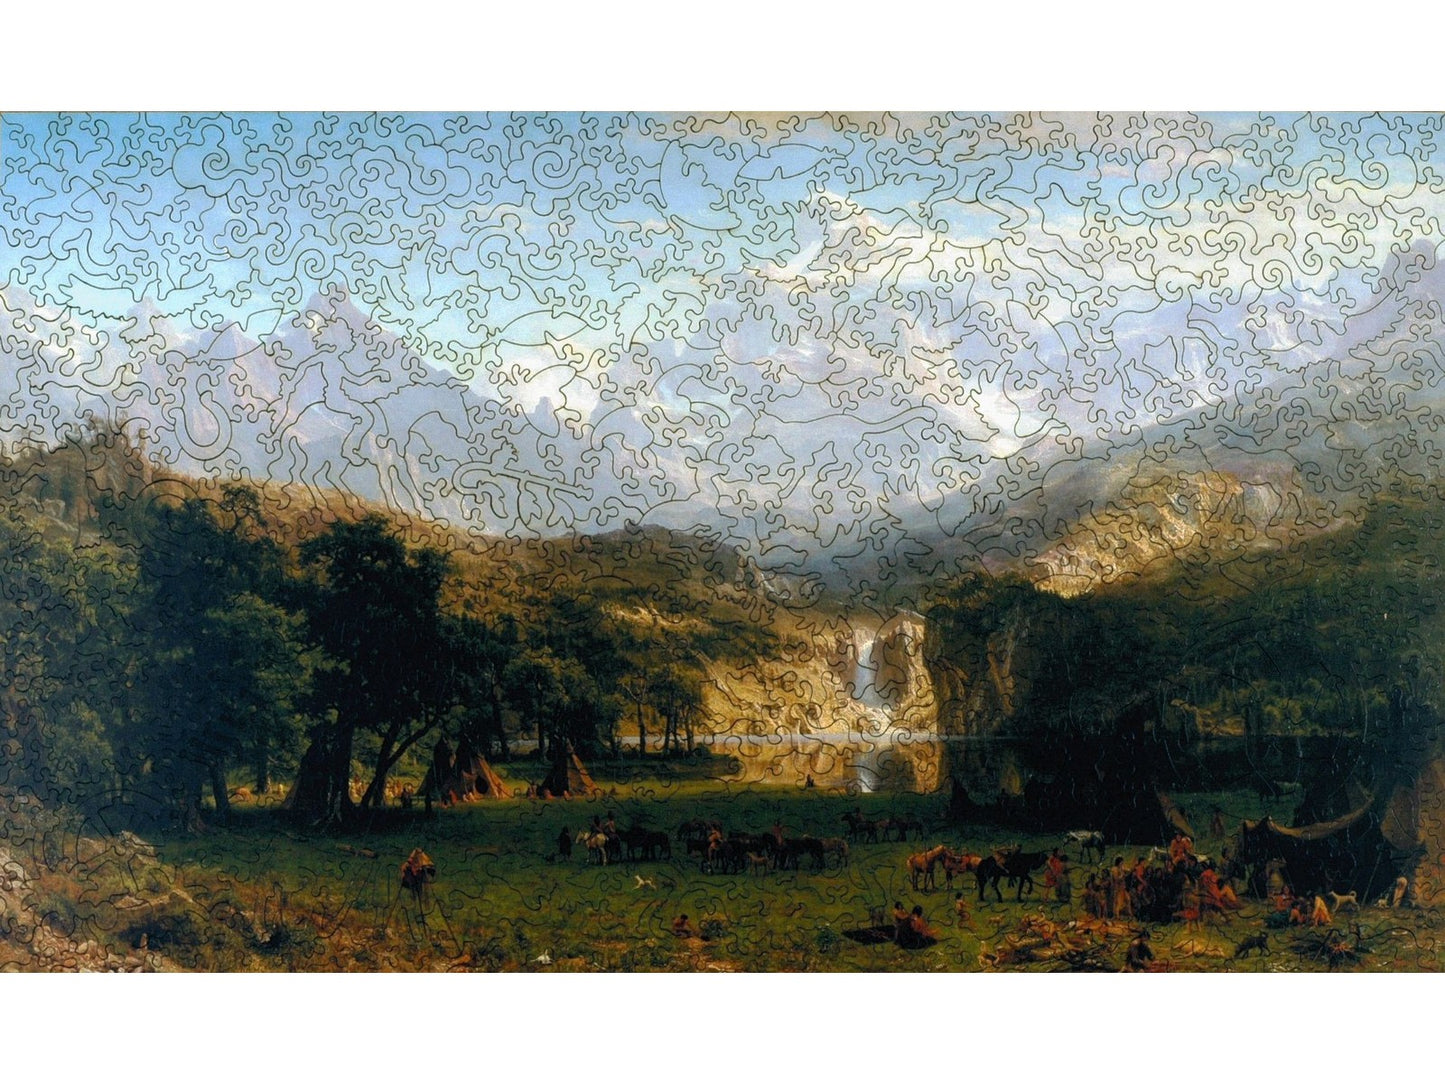 The front of the puzzle, Lander's Peak, showing a landscape scene with mountains and a waterfall going into a lake. 